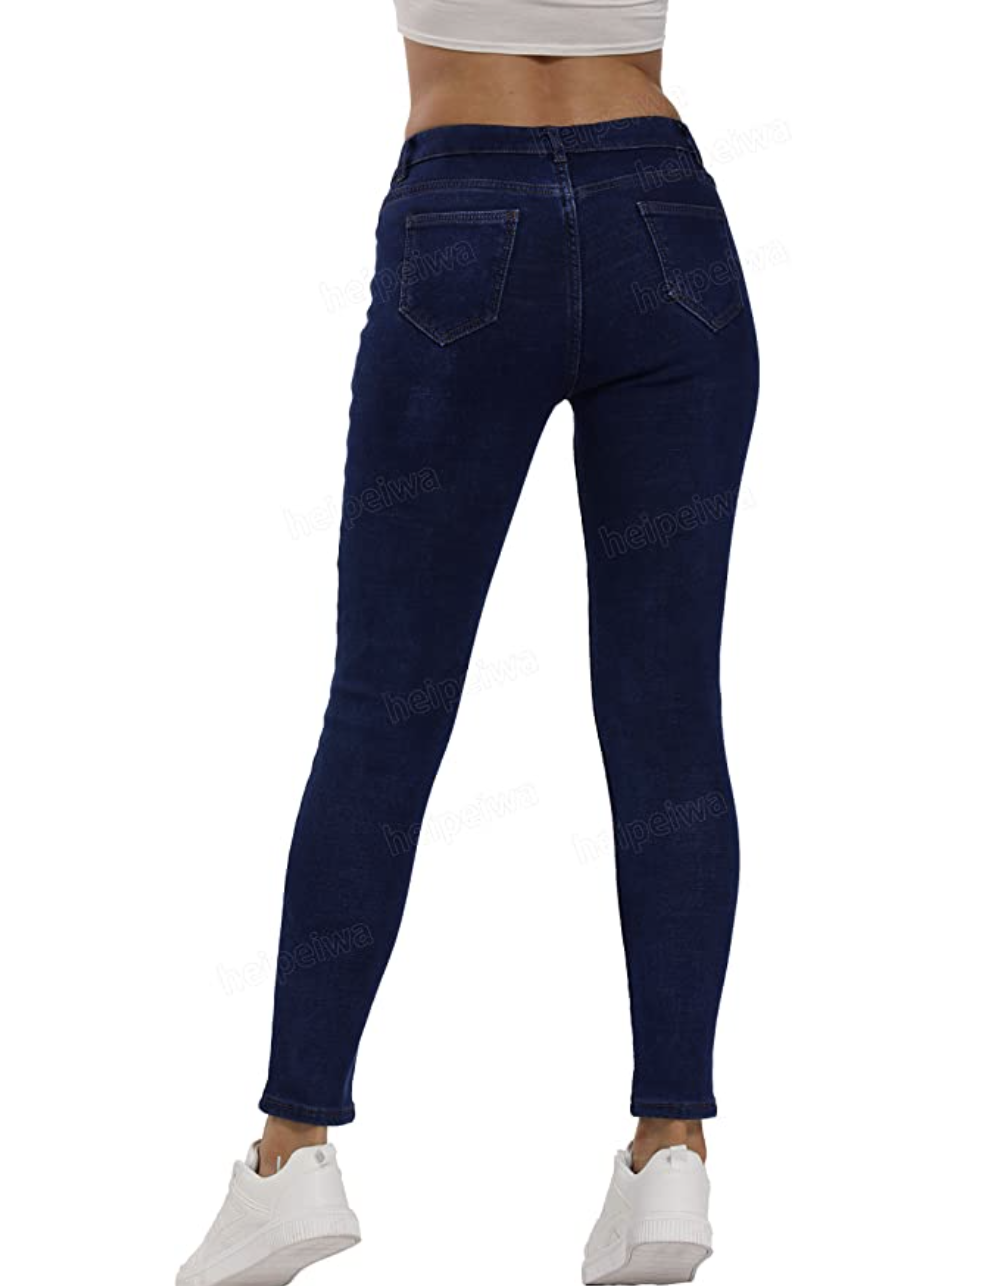 Camii Mia Fleece Lined Jeans for Women Winter Jeans Warm Pants Thermal Denim  Jeggings Slim Fit Mid Rise Stretch - Walmart.com